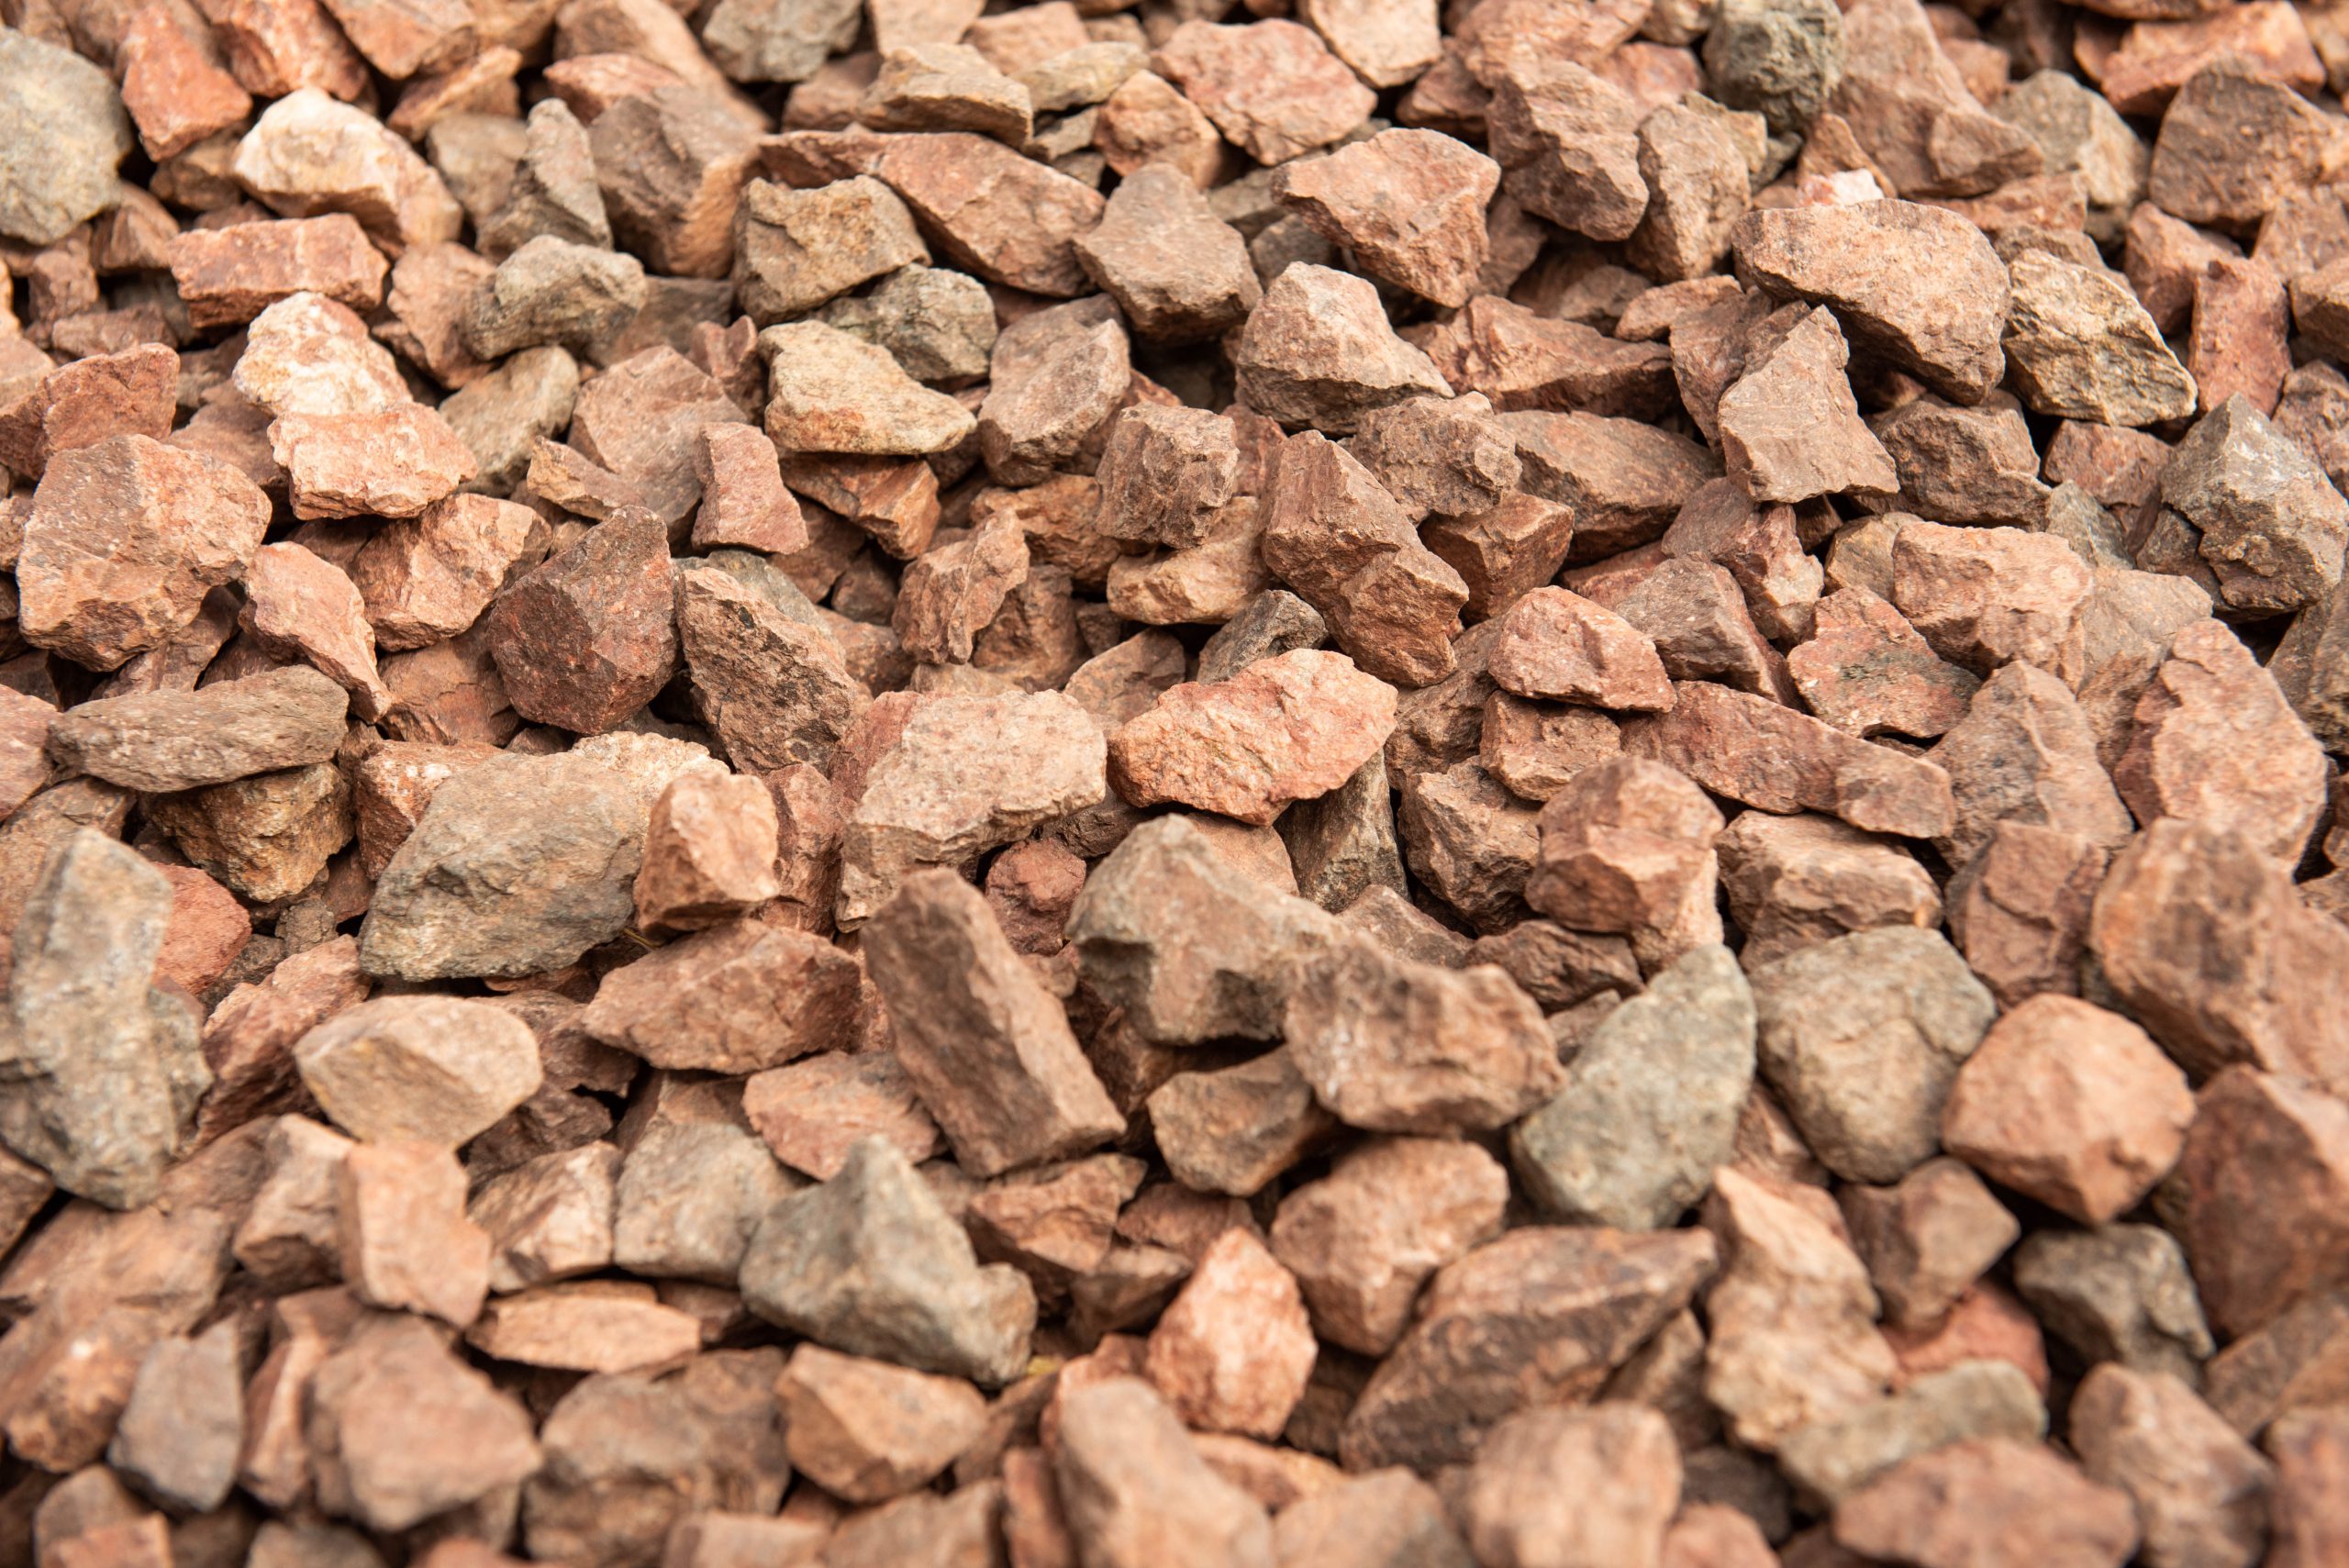 High Quality Landscaping Materials, Landscape Rock Tucson